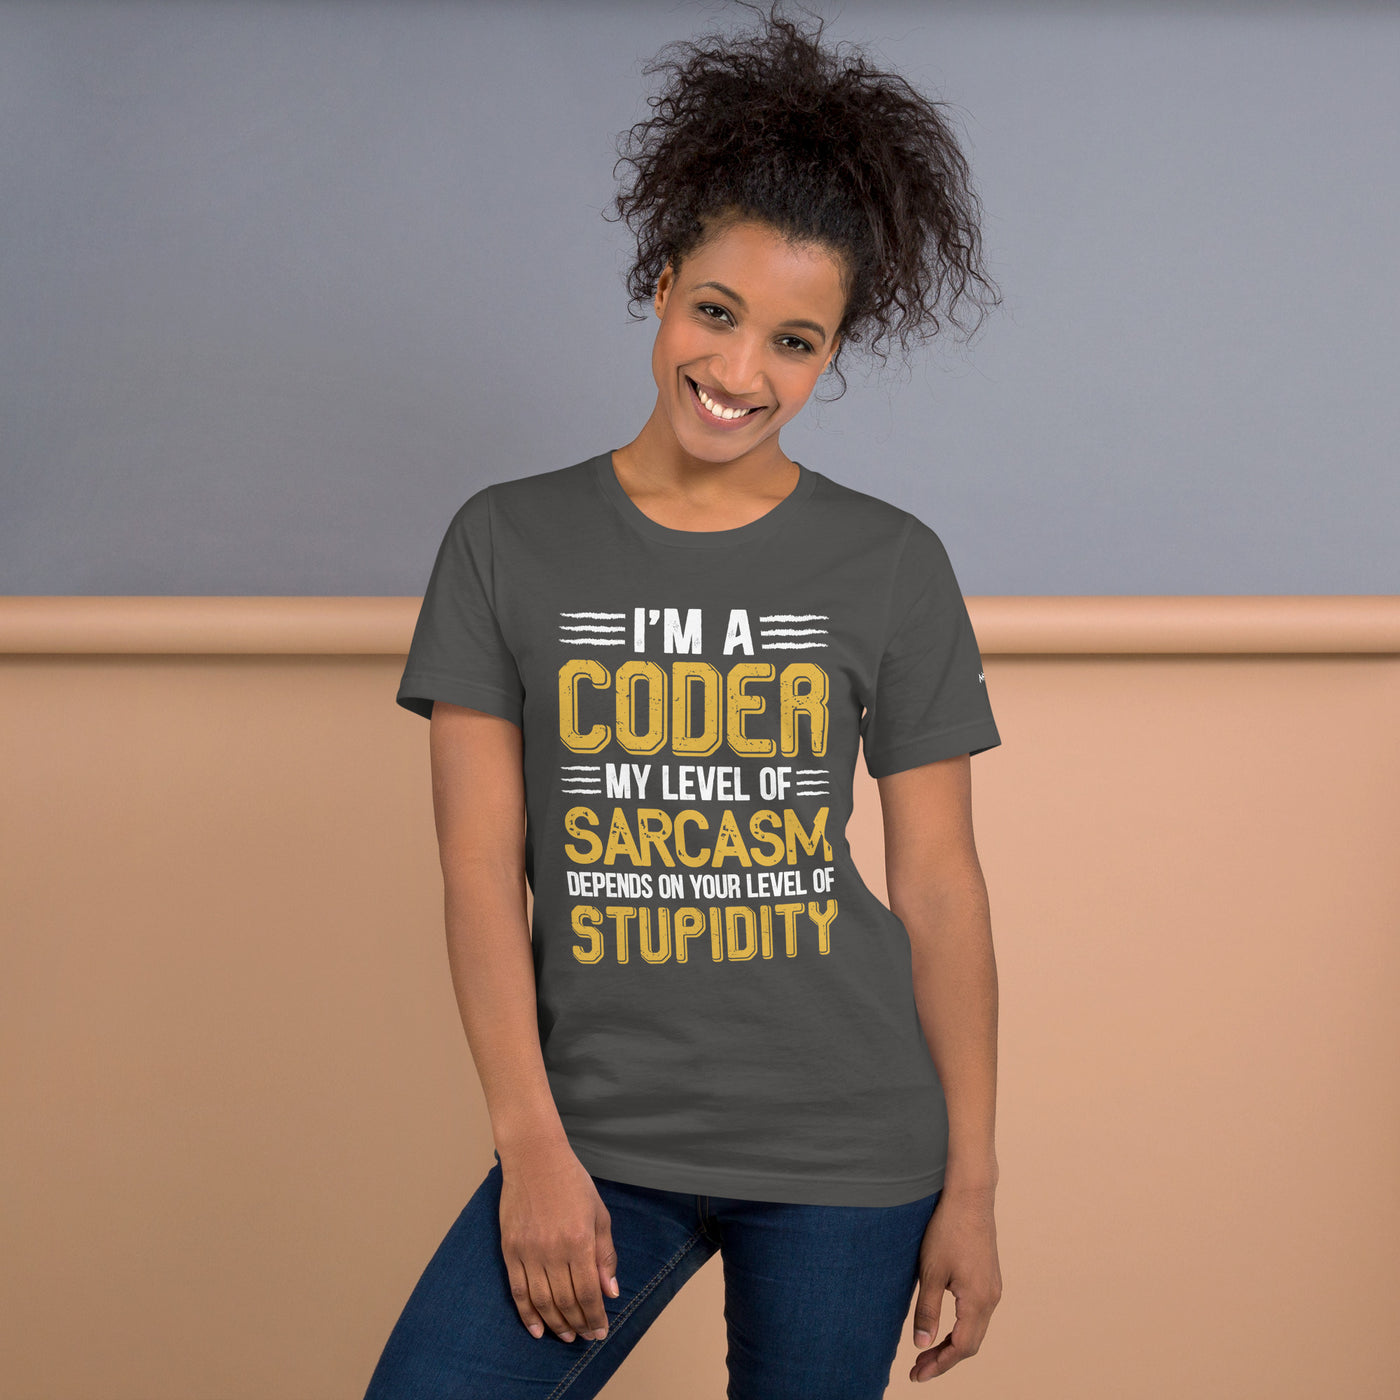 I am a Coder; my level of Sarcasm Depends on your level of Stupidity - Unisex t-shirt